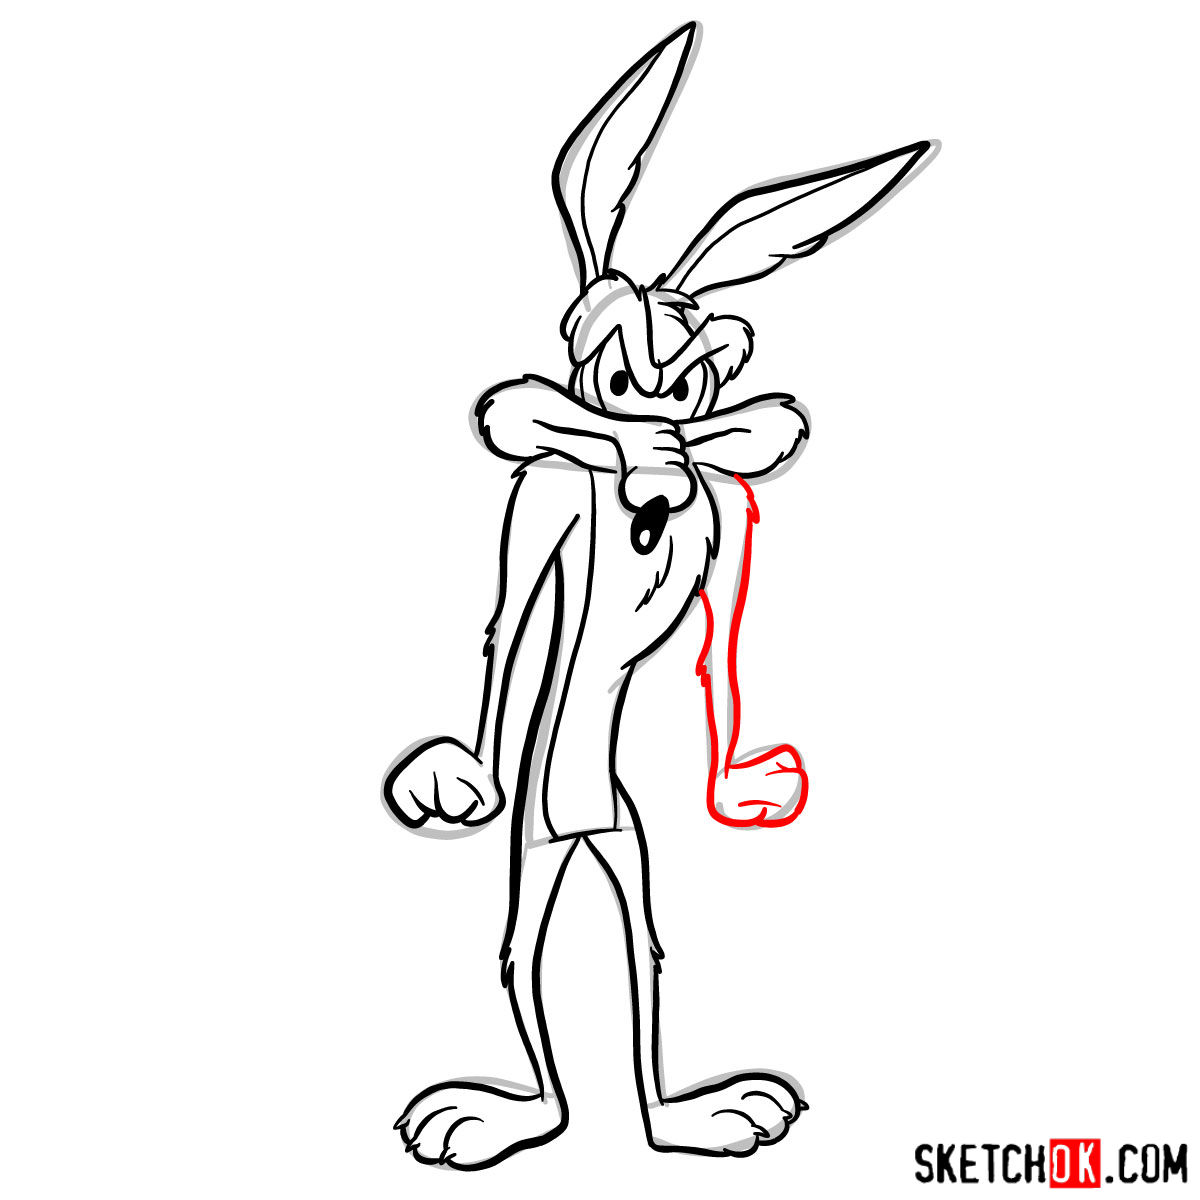 Step-by-step drawing guide of Wile E. Coyote.